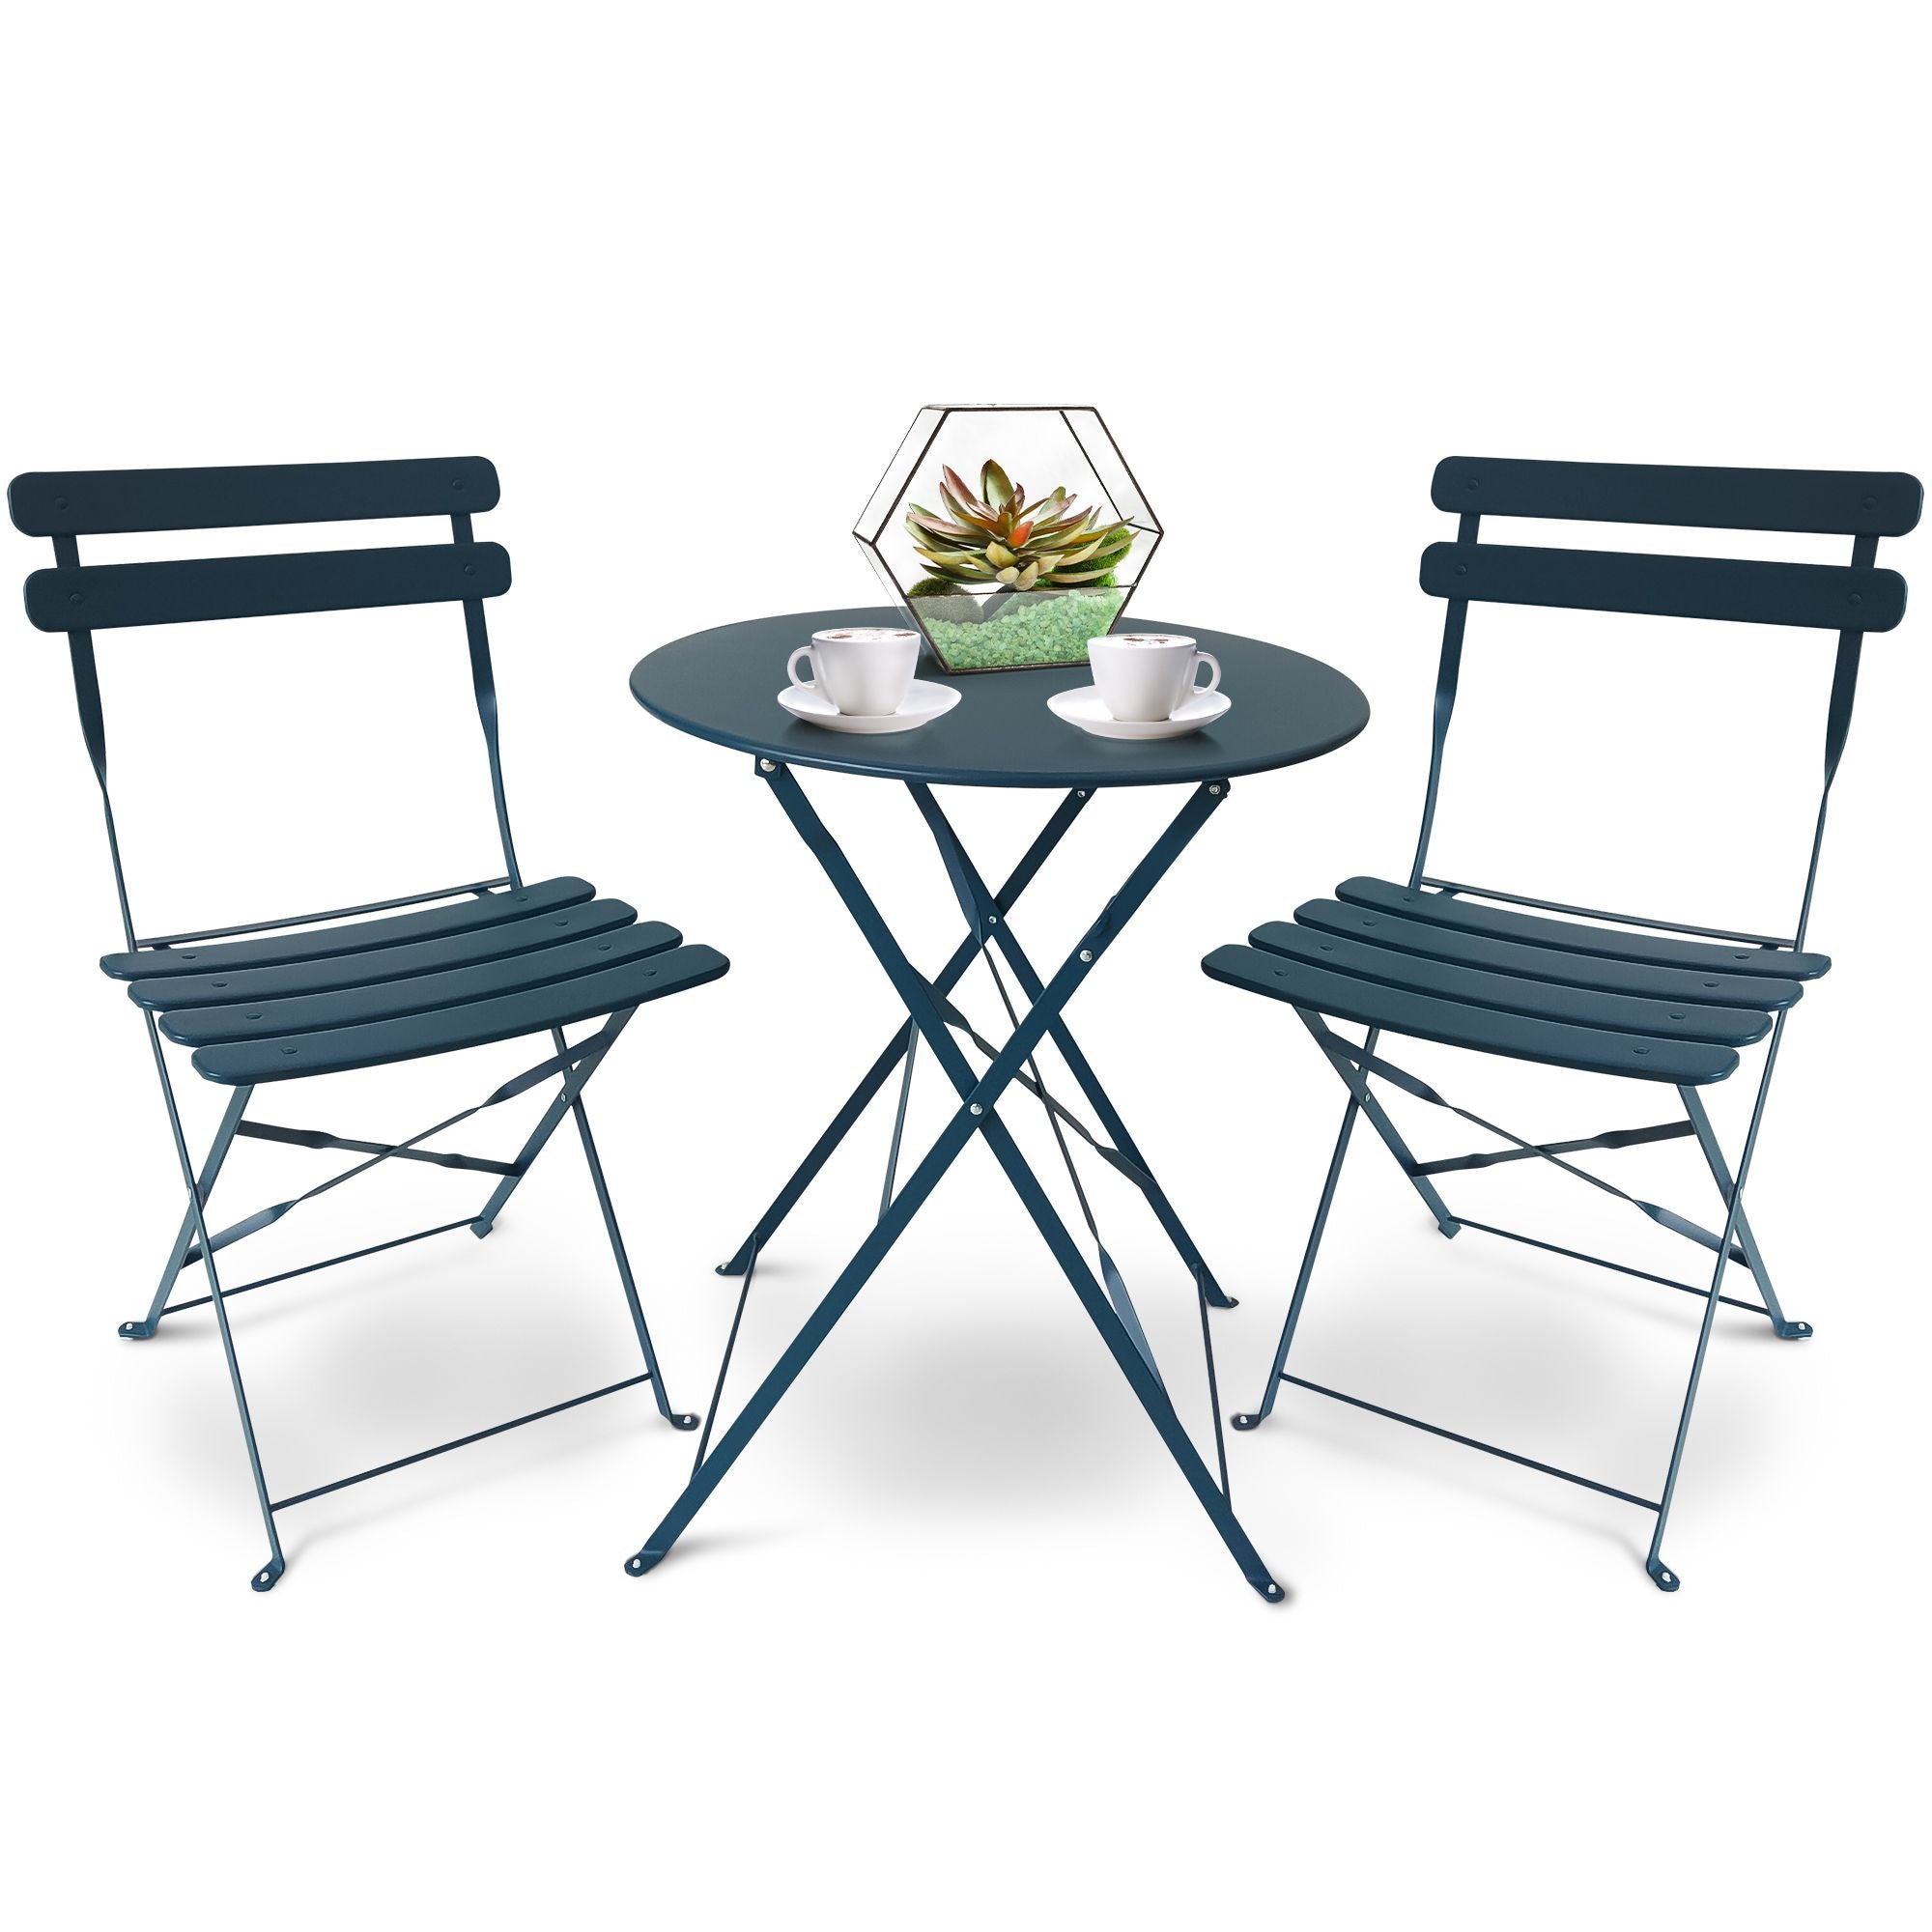 SUNMER Bistro Table & Chairs Set - Blue